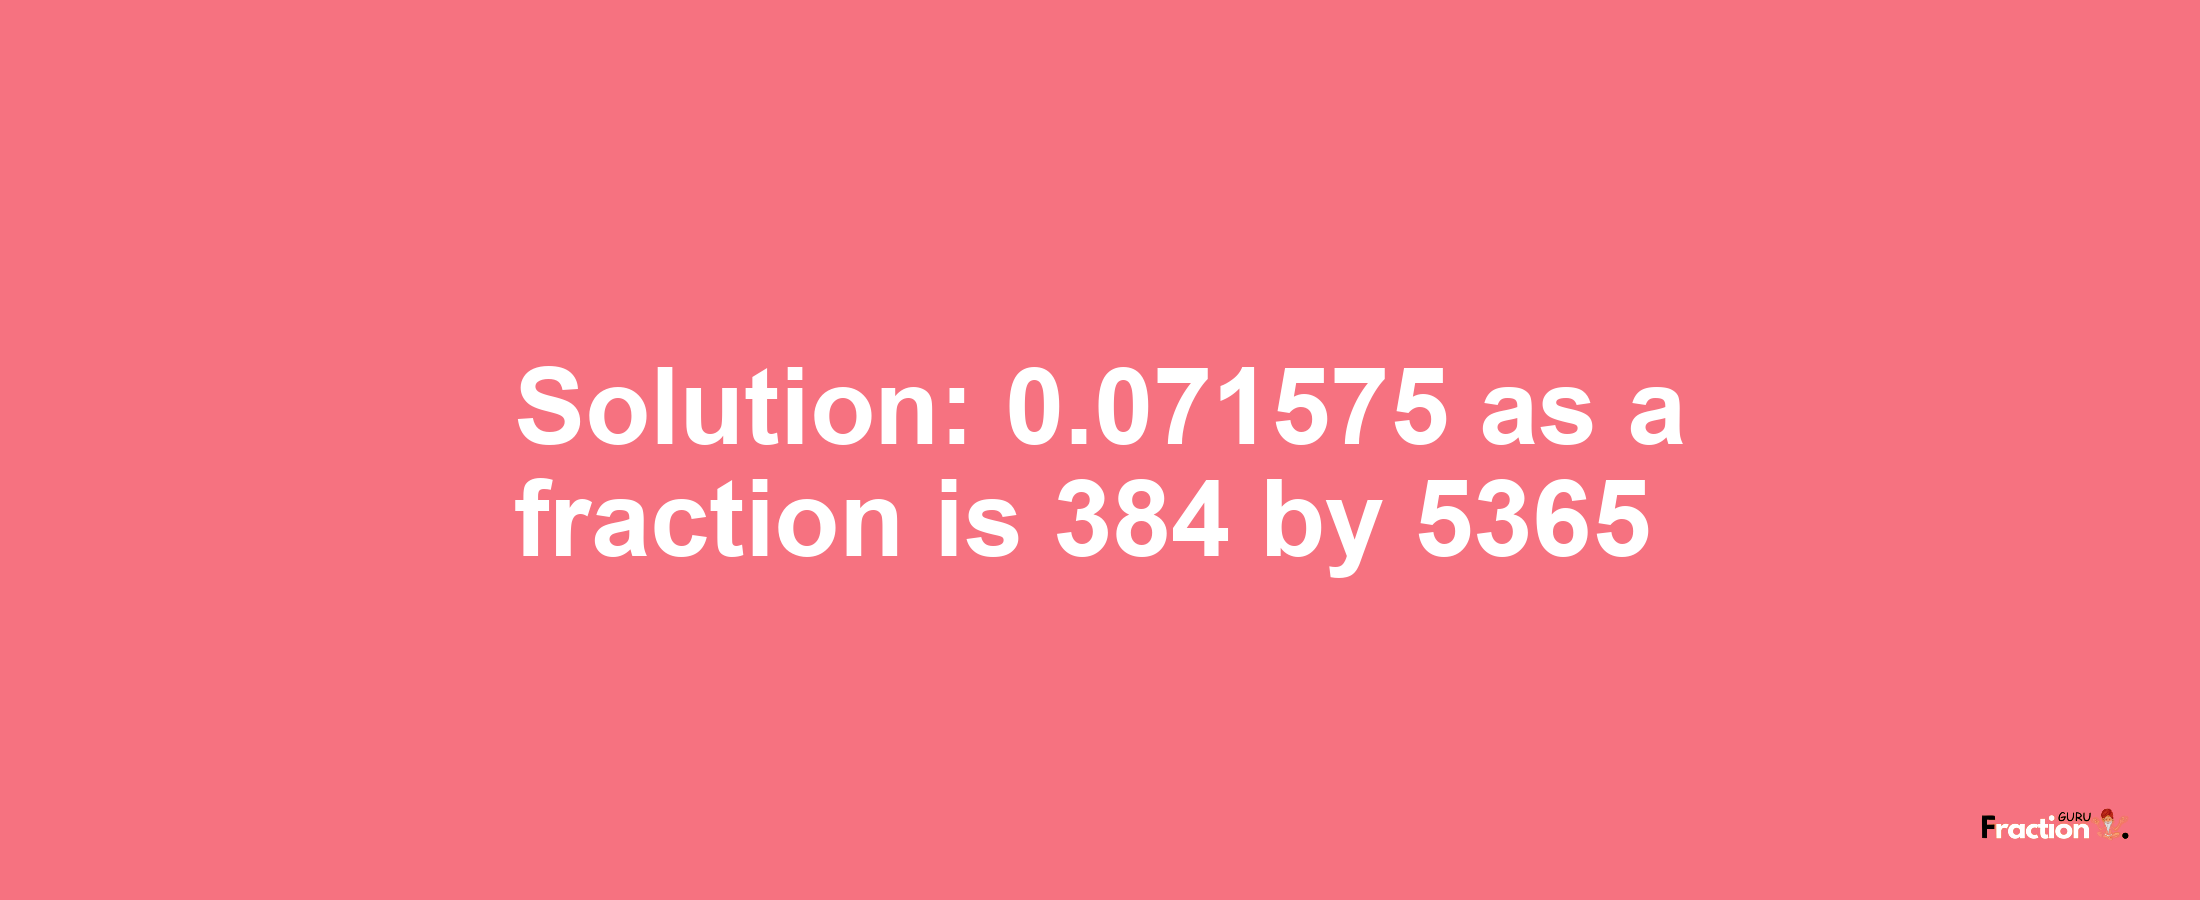 Solution:0.071575 as a fraction is 384/5365